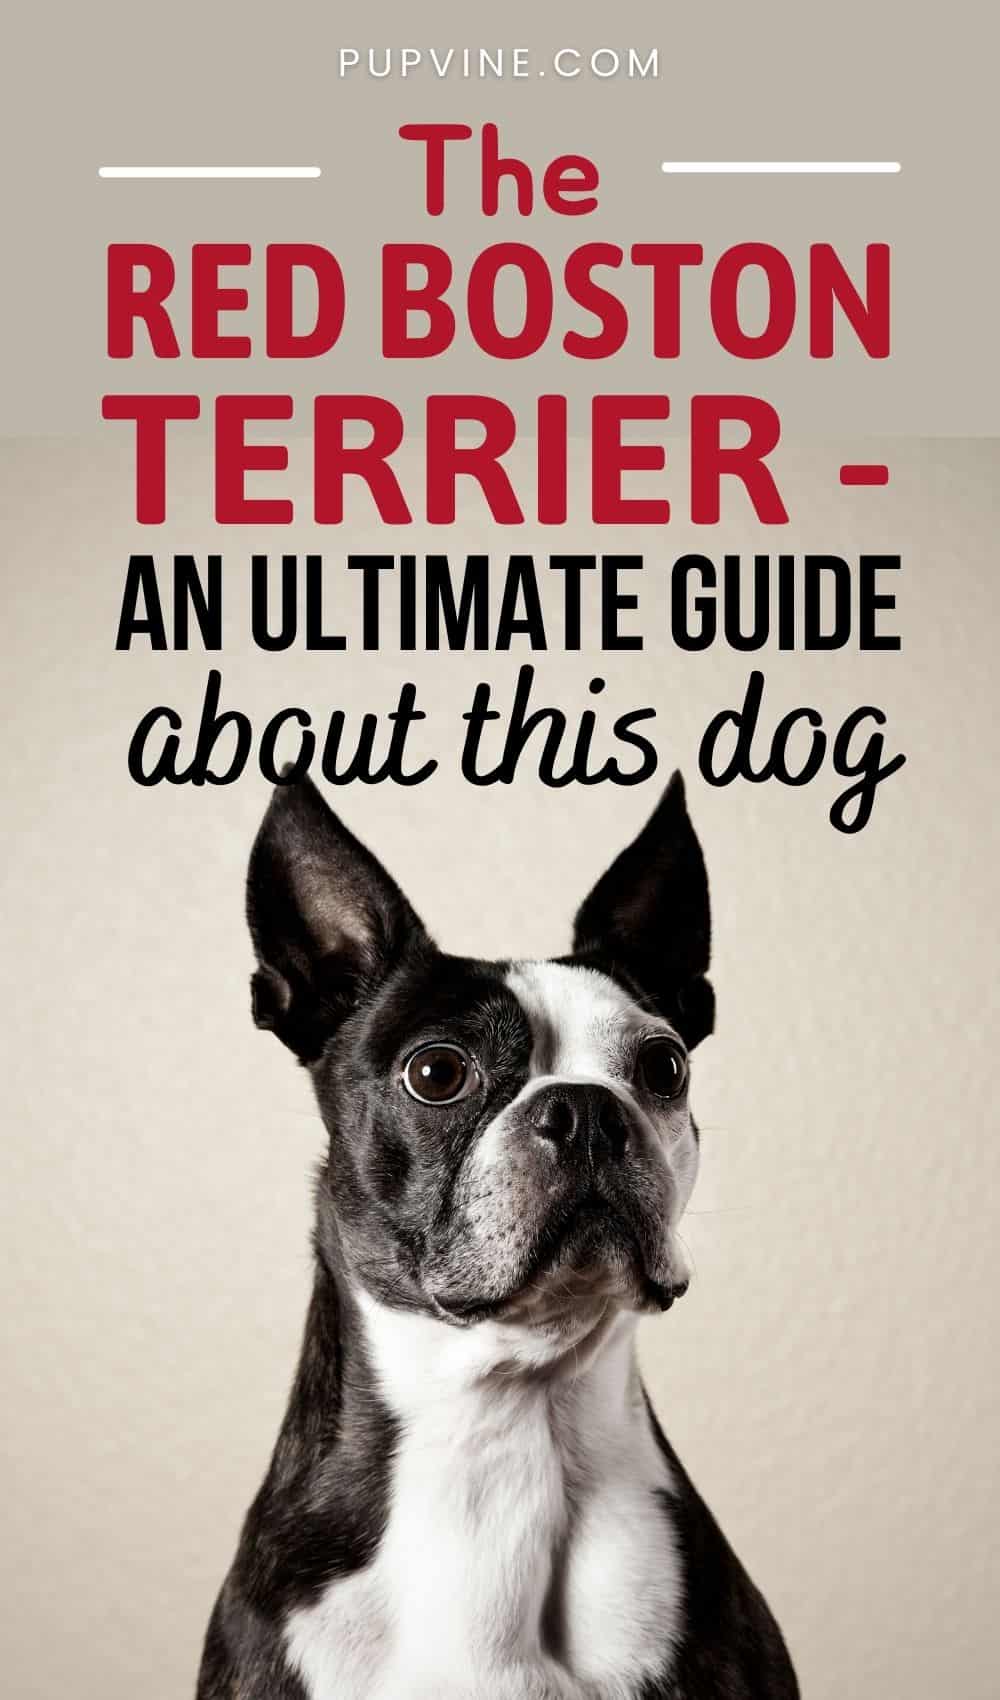 The Red Boston Terrier - An Ultimate Guide About This Dog